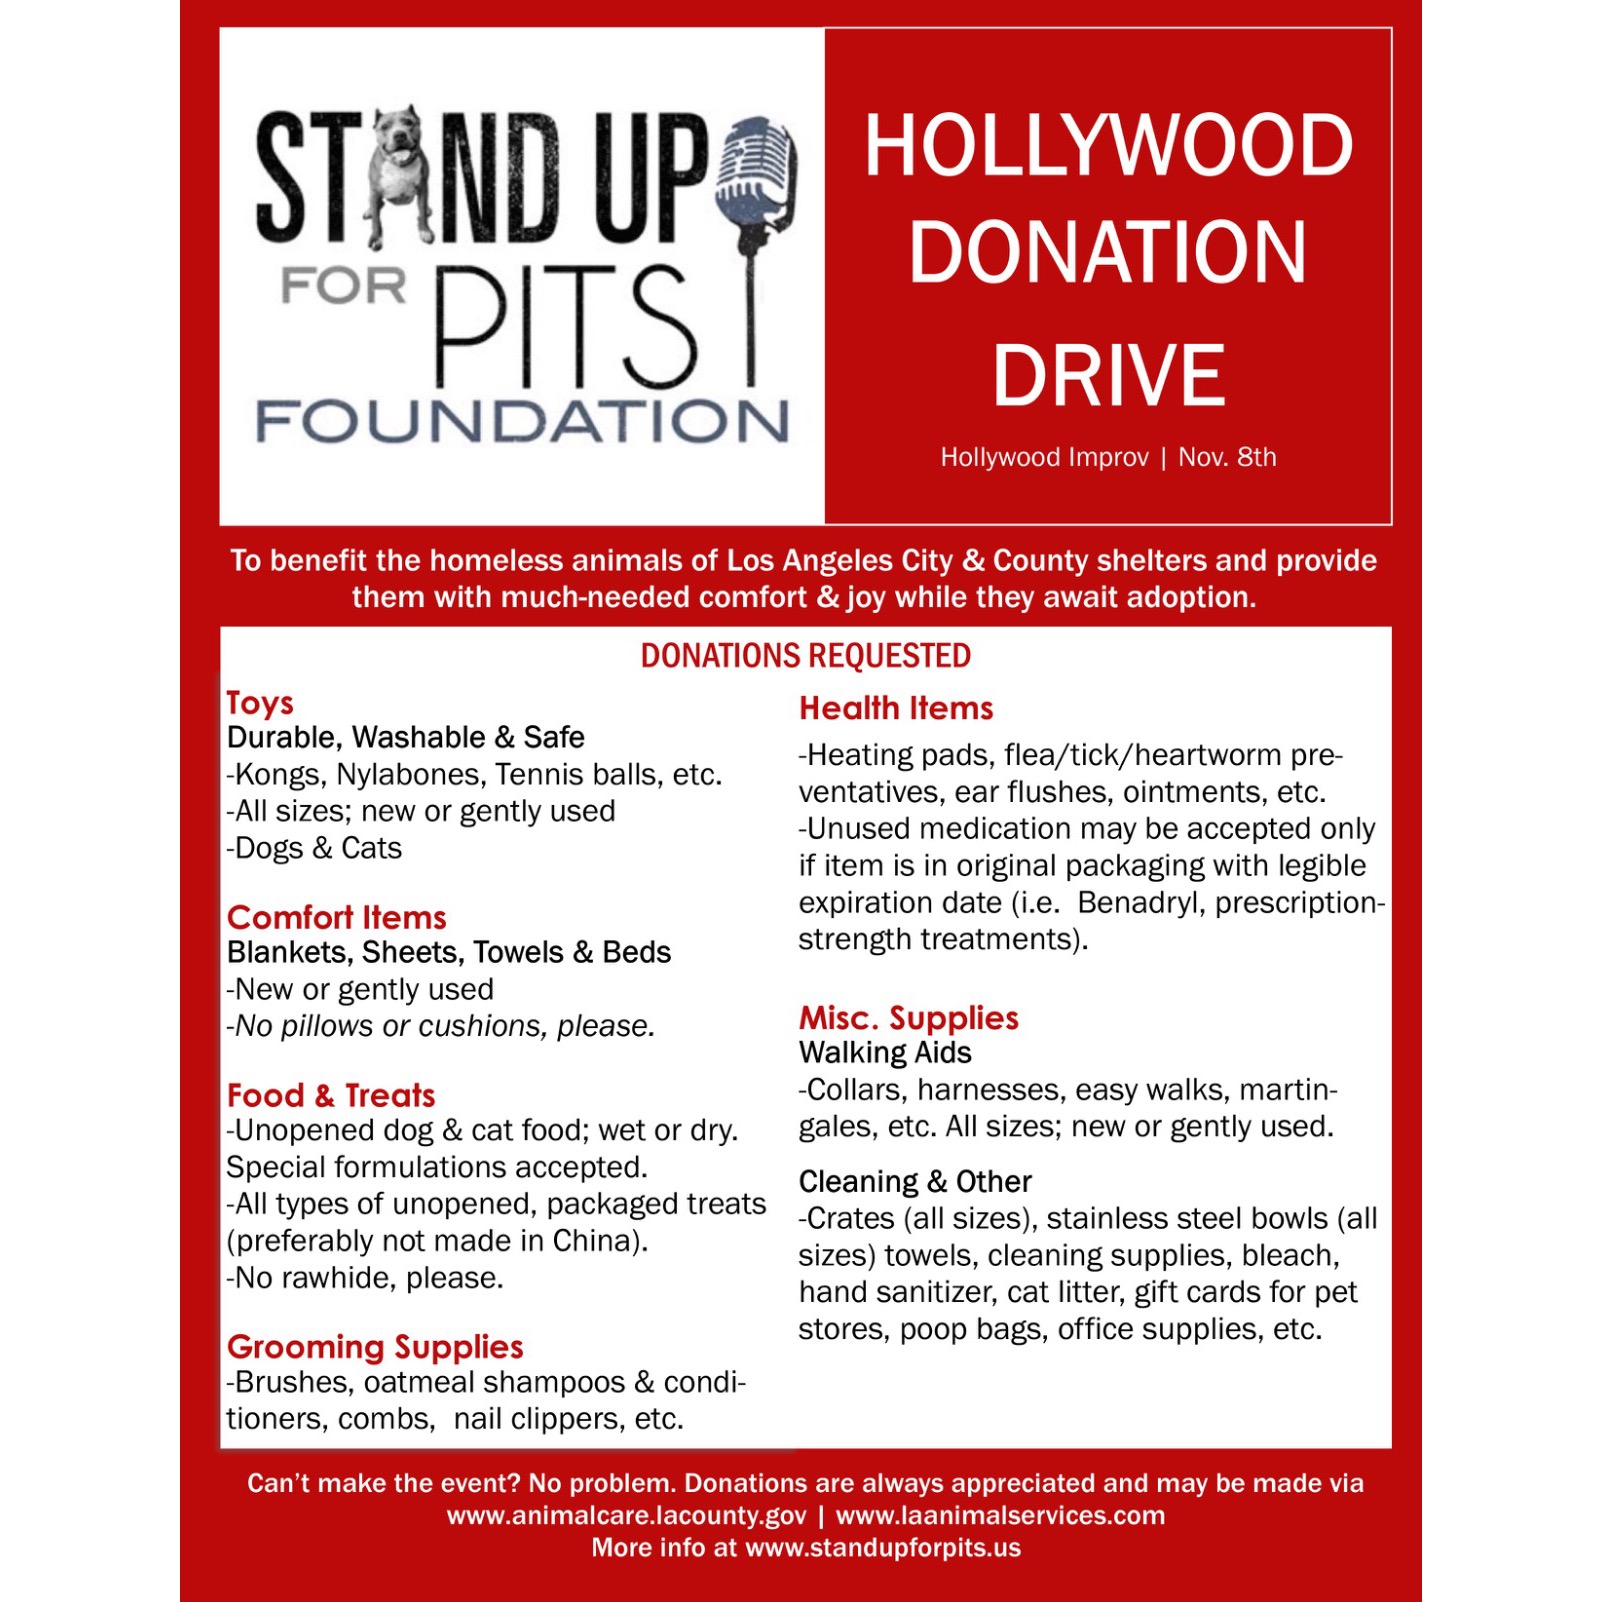 Hollywood’s SUFP Donation Drive is coming up!